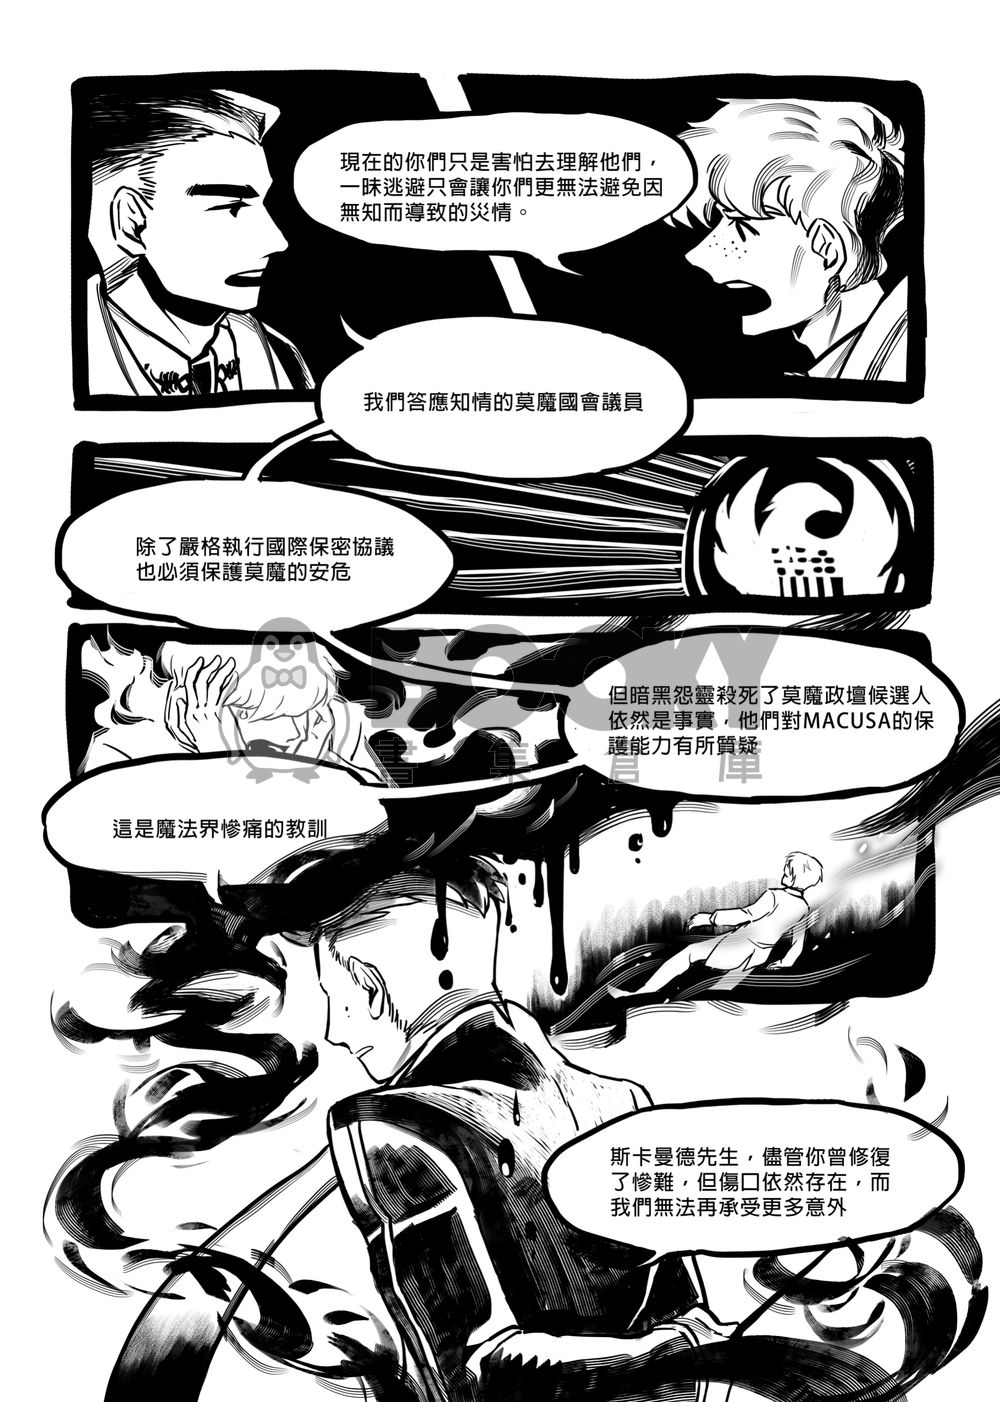 For the first time into your darkness 試閱圖片